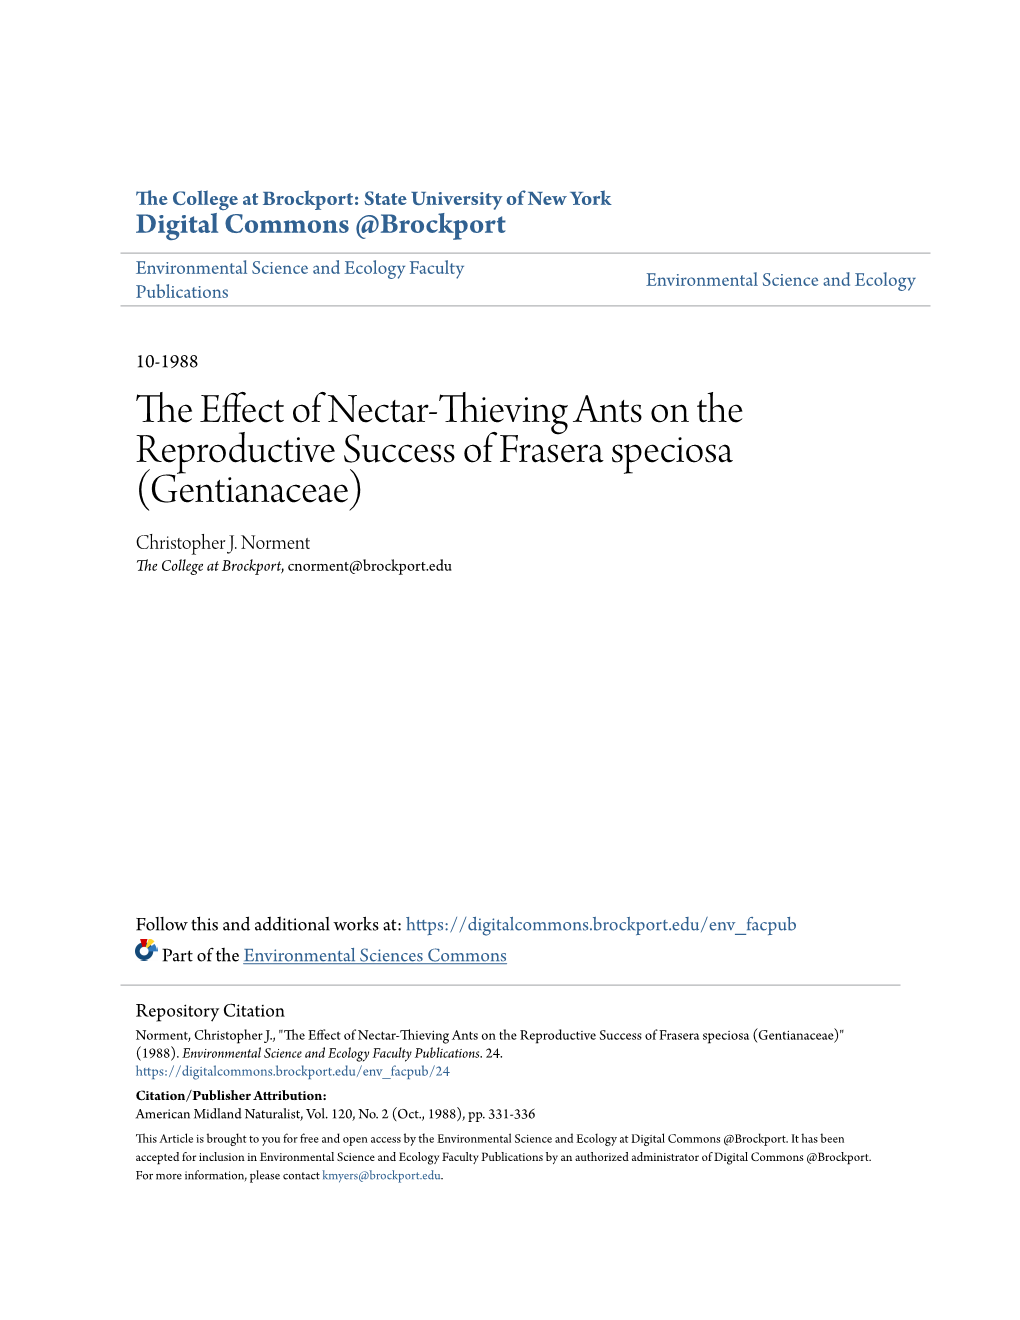 The Effect of Nectar-Thieving Ants on the Reproductive Success of Frasera Speciosa (Gentianaceae)" (1988)